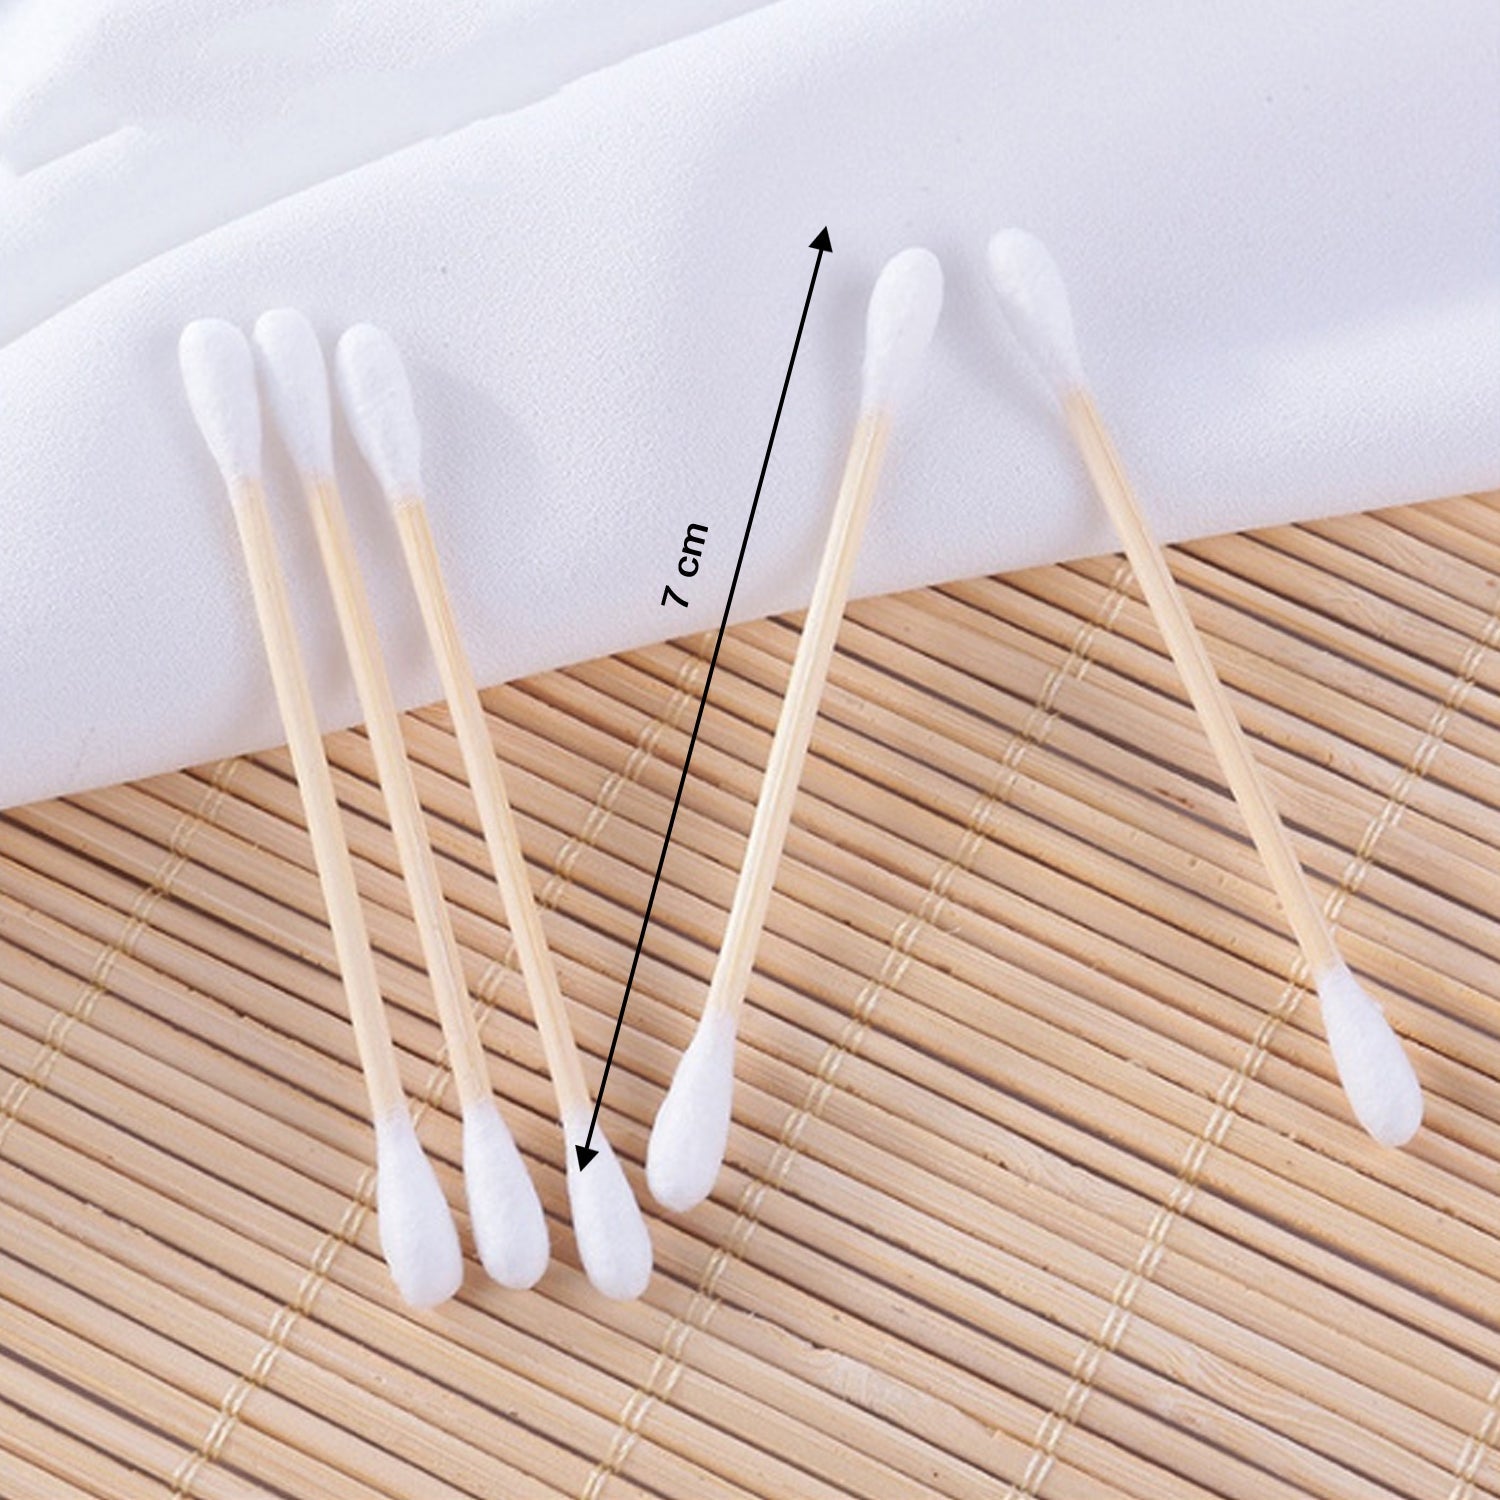 6016 Cotton Swabs Bamboo with Wooden Handles for Makeup Clean Care Ear Cleaning Wound Care Cosmetic Tool Double Head Biodegradable Eco Friendly (pack of 20) DeoDap